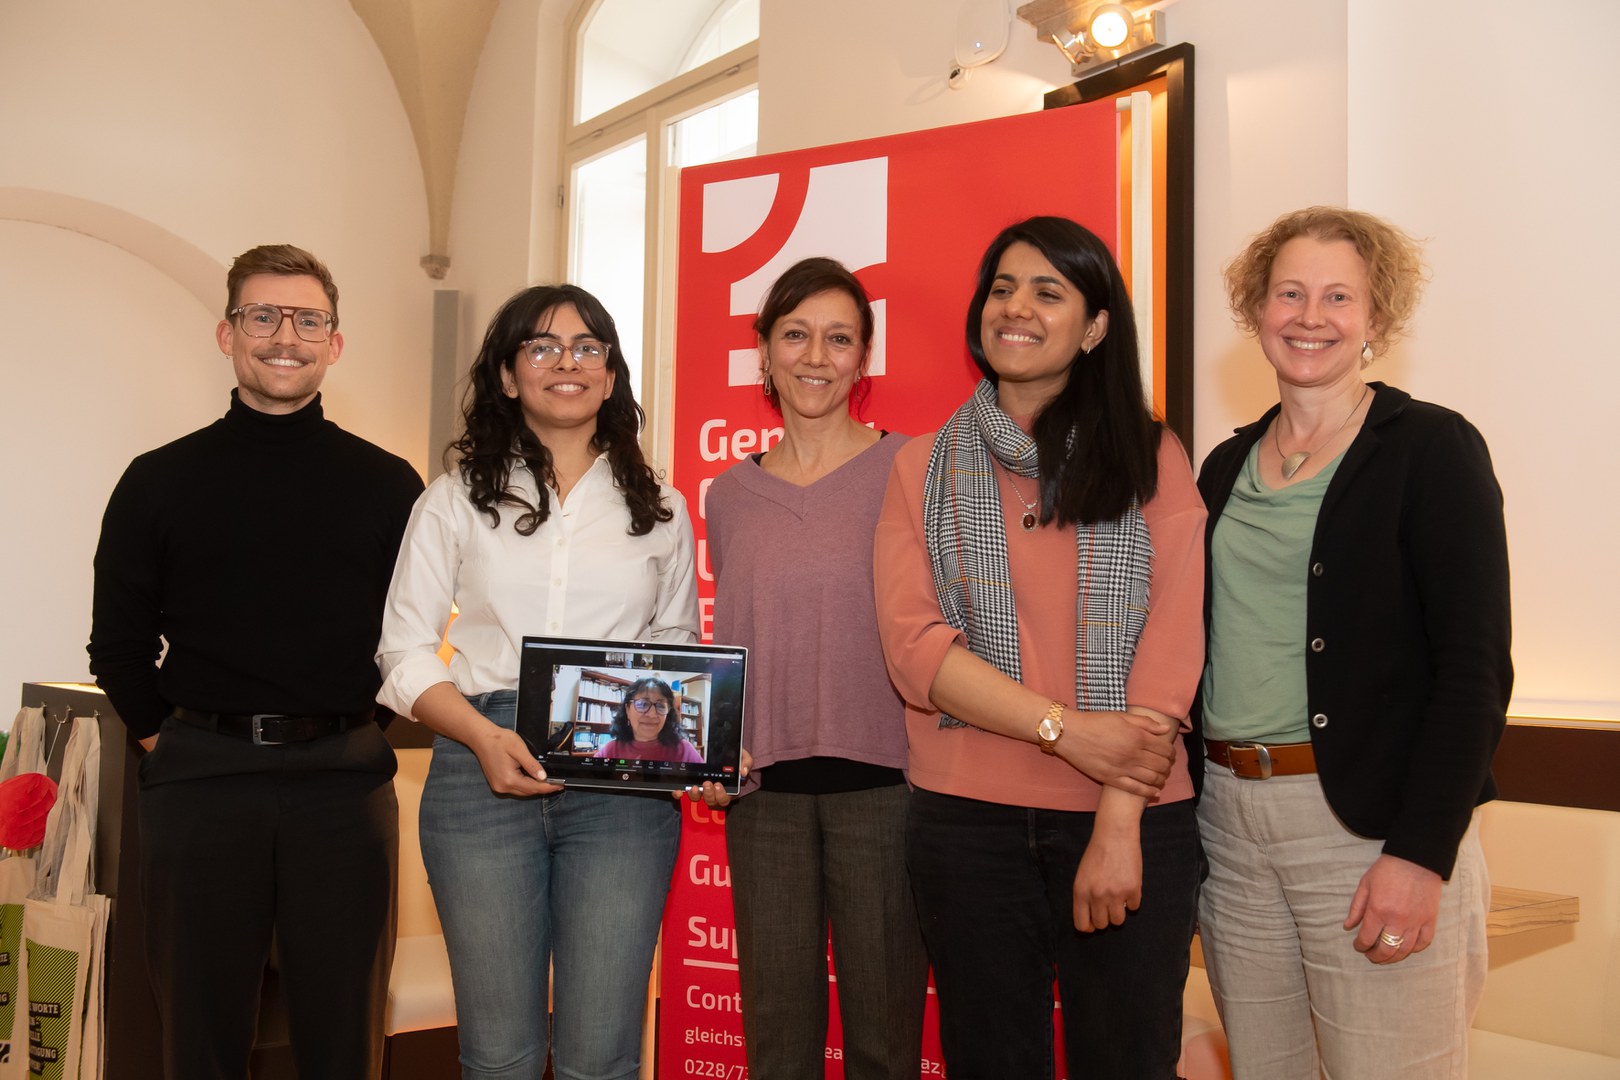 Honoured with the Maria von Linden Prize (from left): Sascha Sistenich and the Gender Group of the Centre for Development Research with Purti Sadhwani, Dr Eva Youkhana, Dr Sundus Saleemi, Dr Tina Beuchelt and Dr Dennis Lucy Aviles Irahola on the tablet.